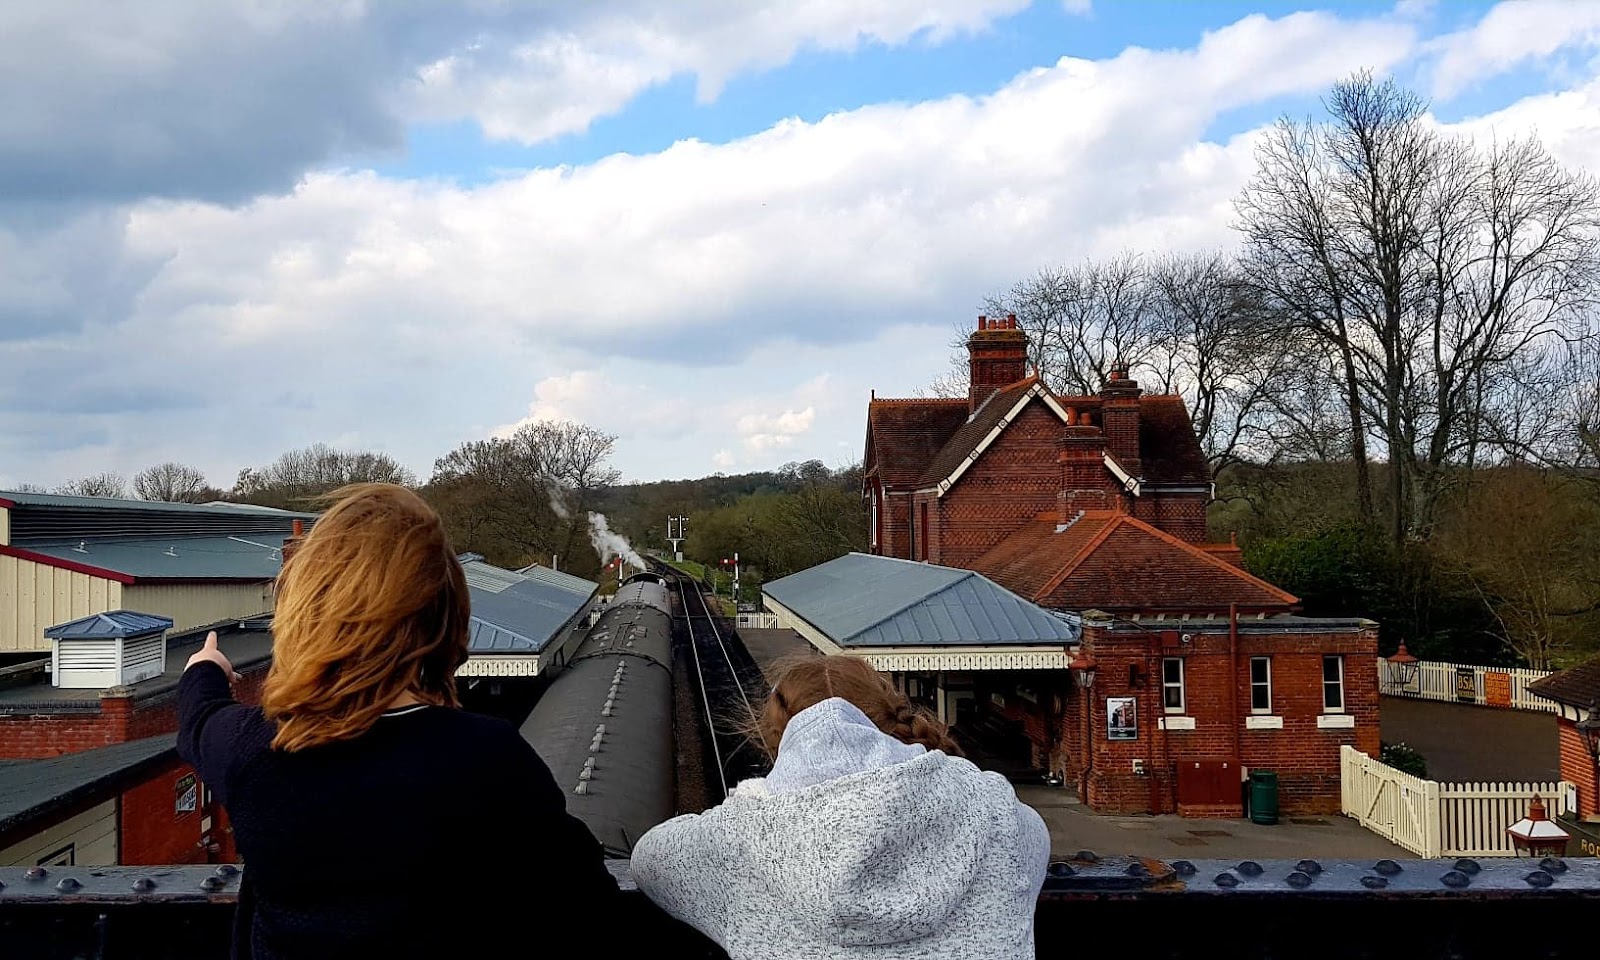 Sussex Based| The Bluebell Railway 